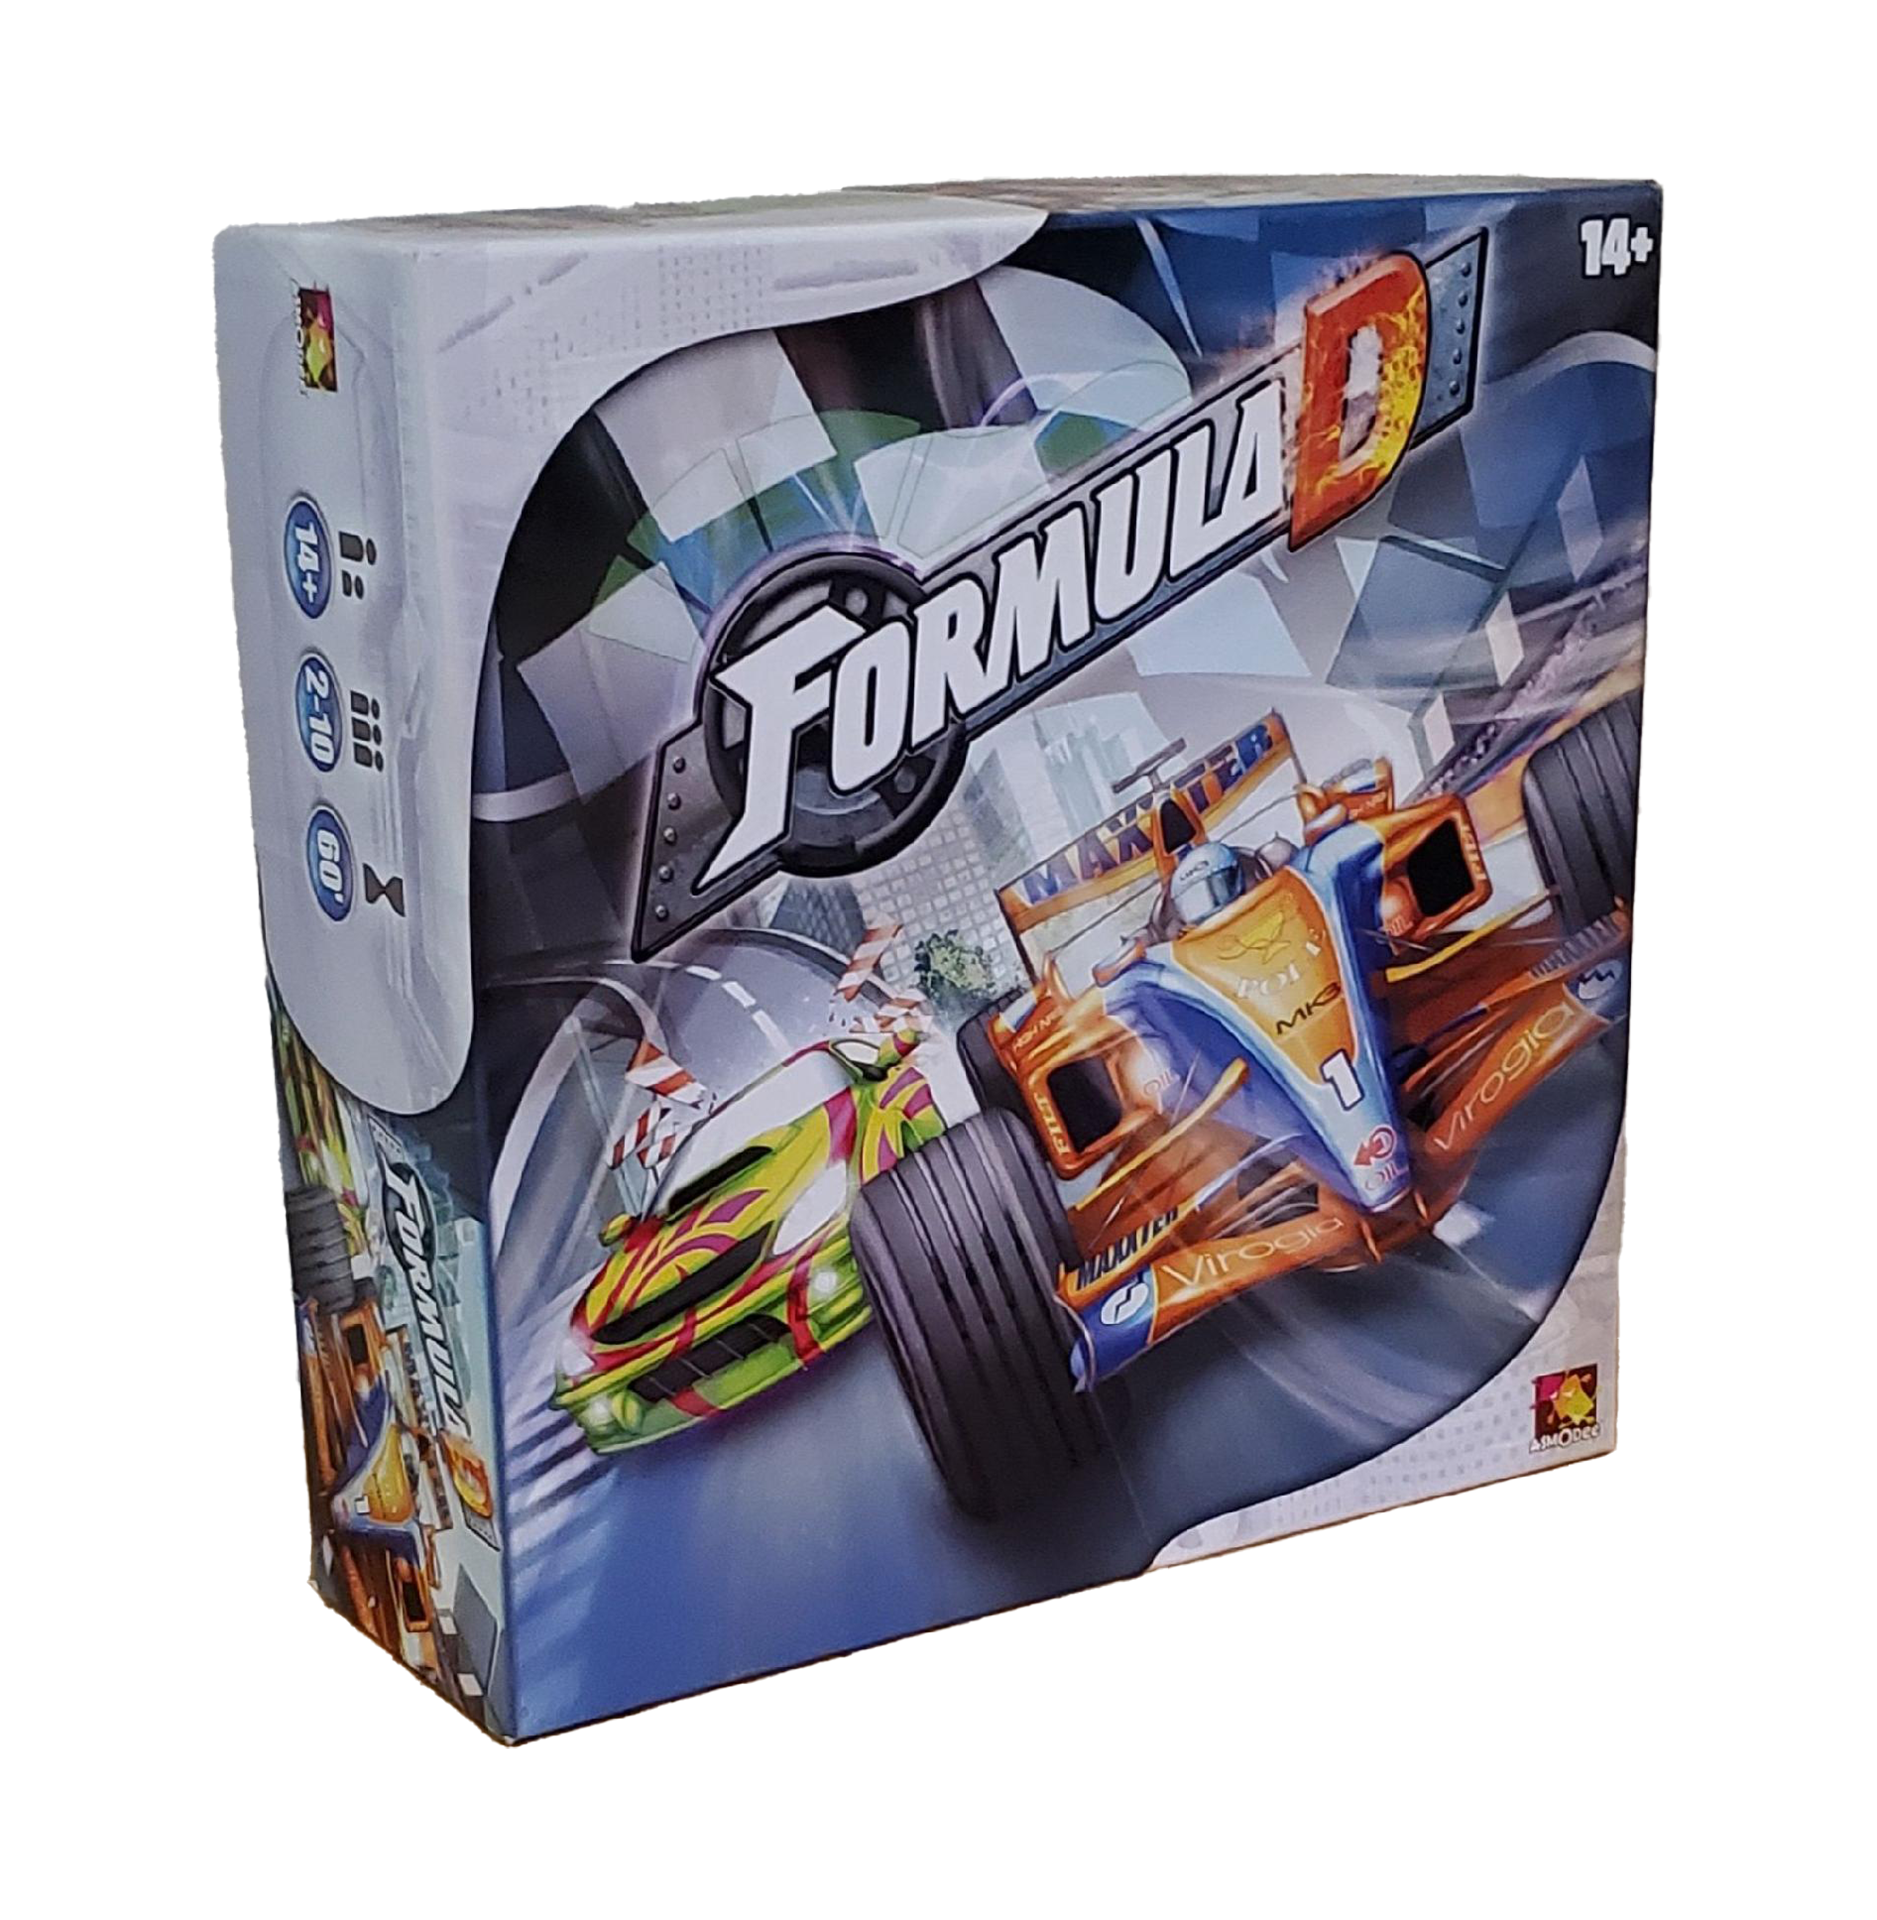 The board game Formula D by Asmodee